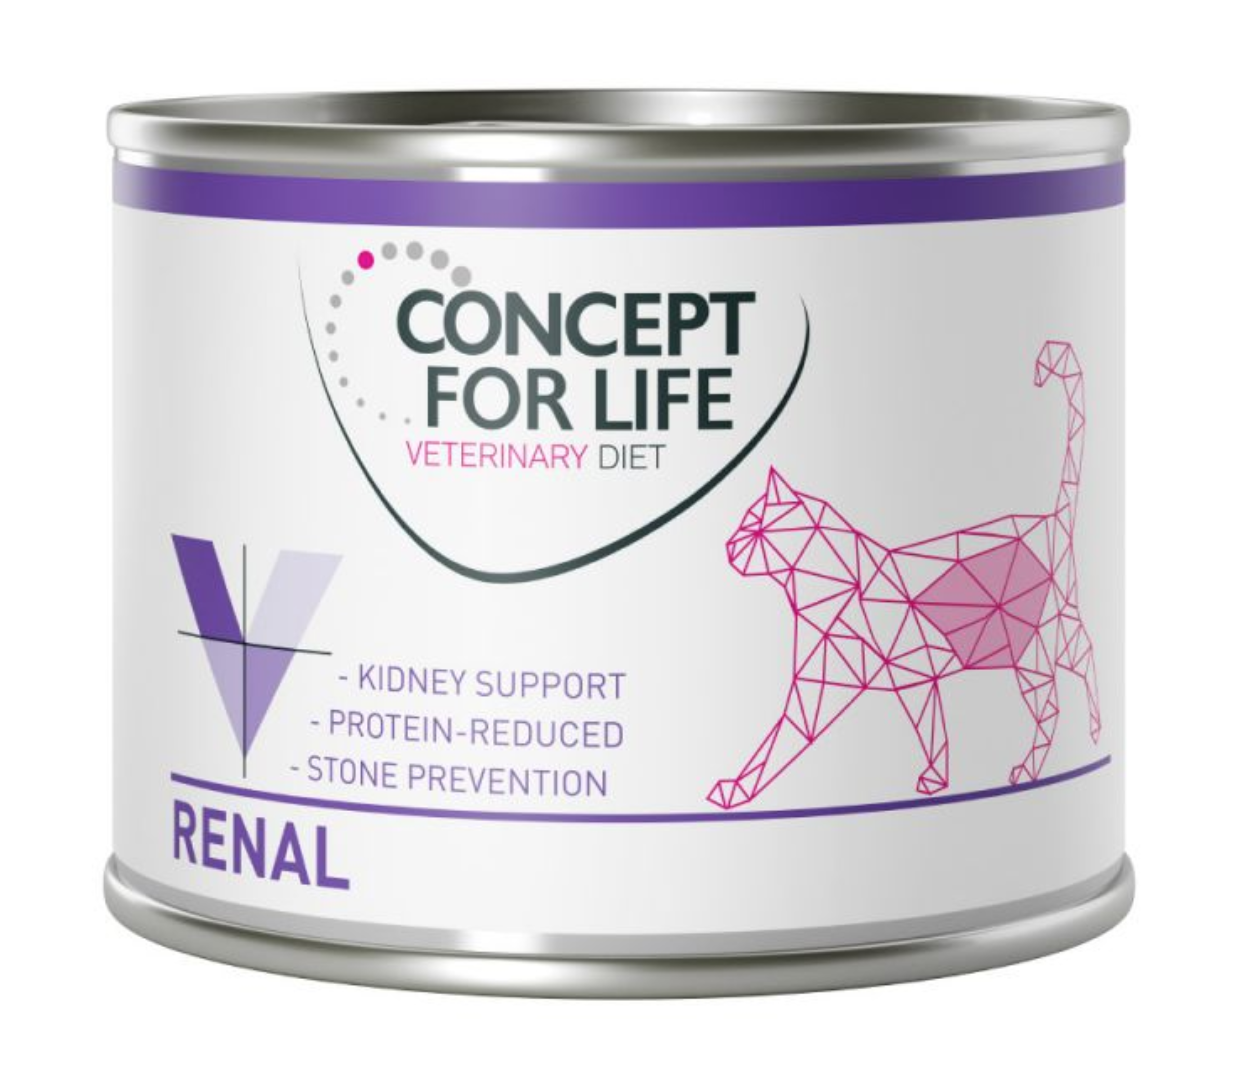 Concept for Life Veterinary Diet Renal Gatto